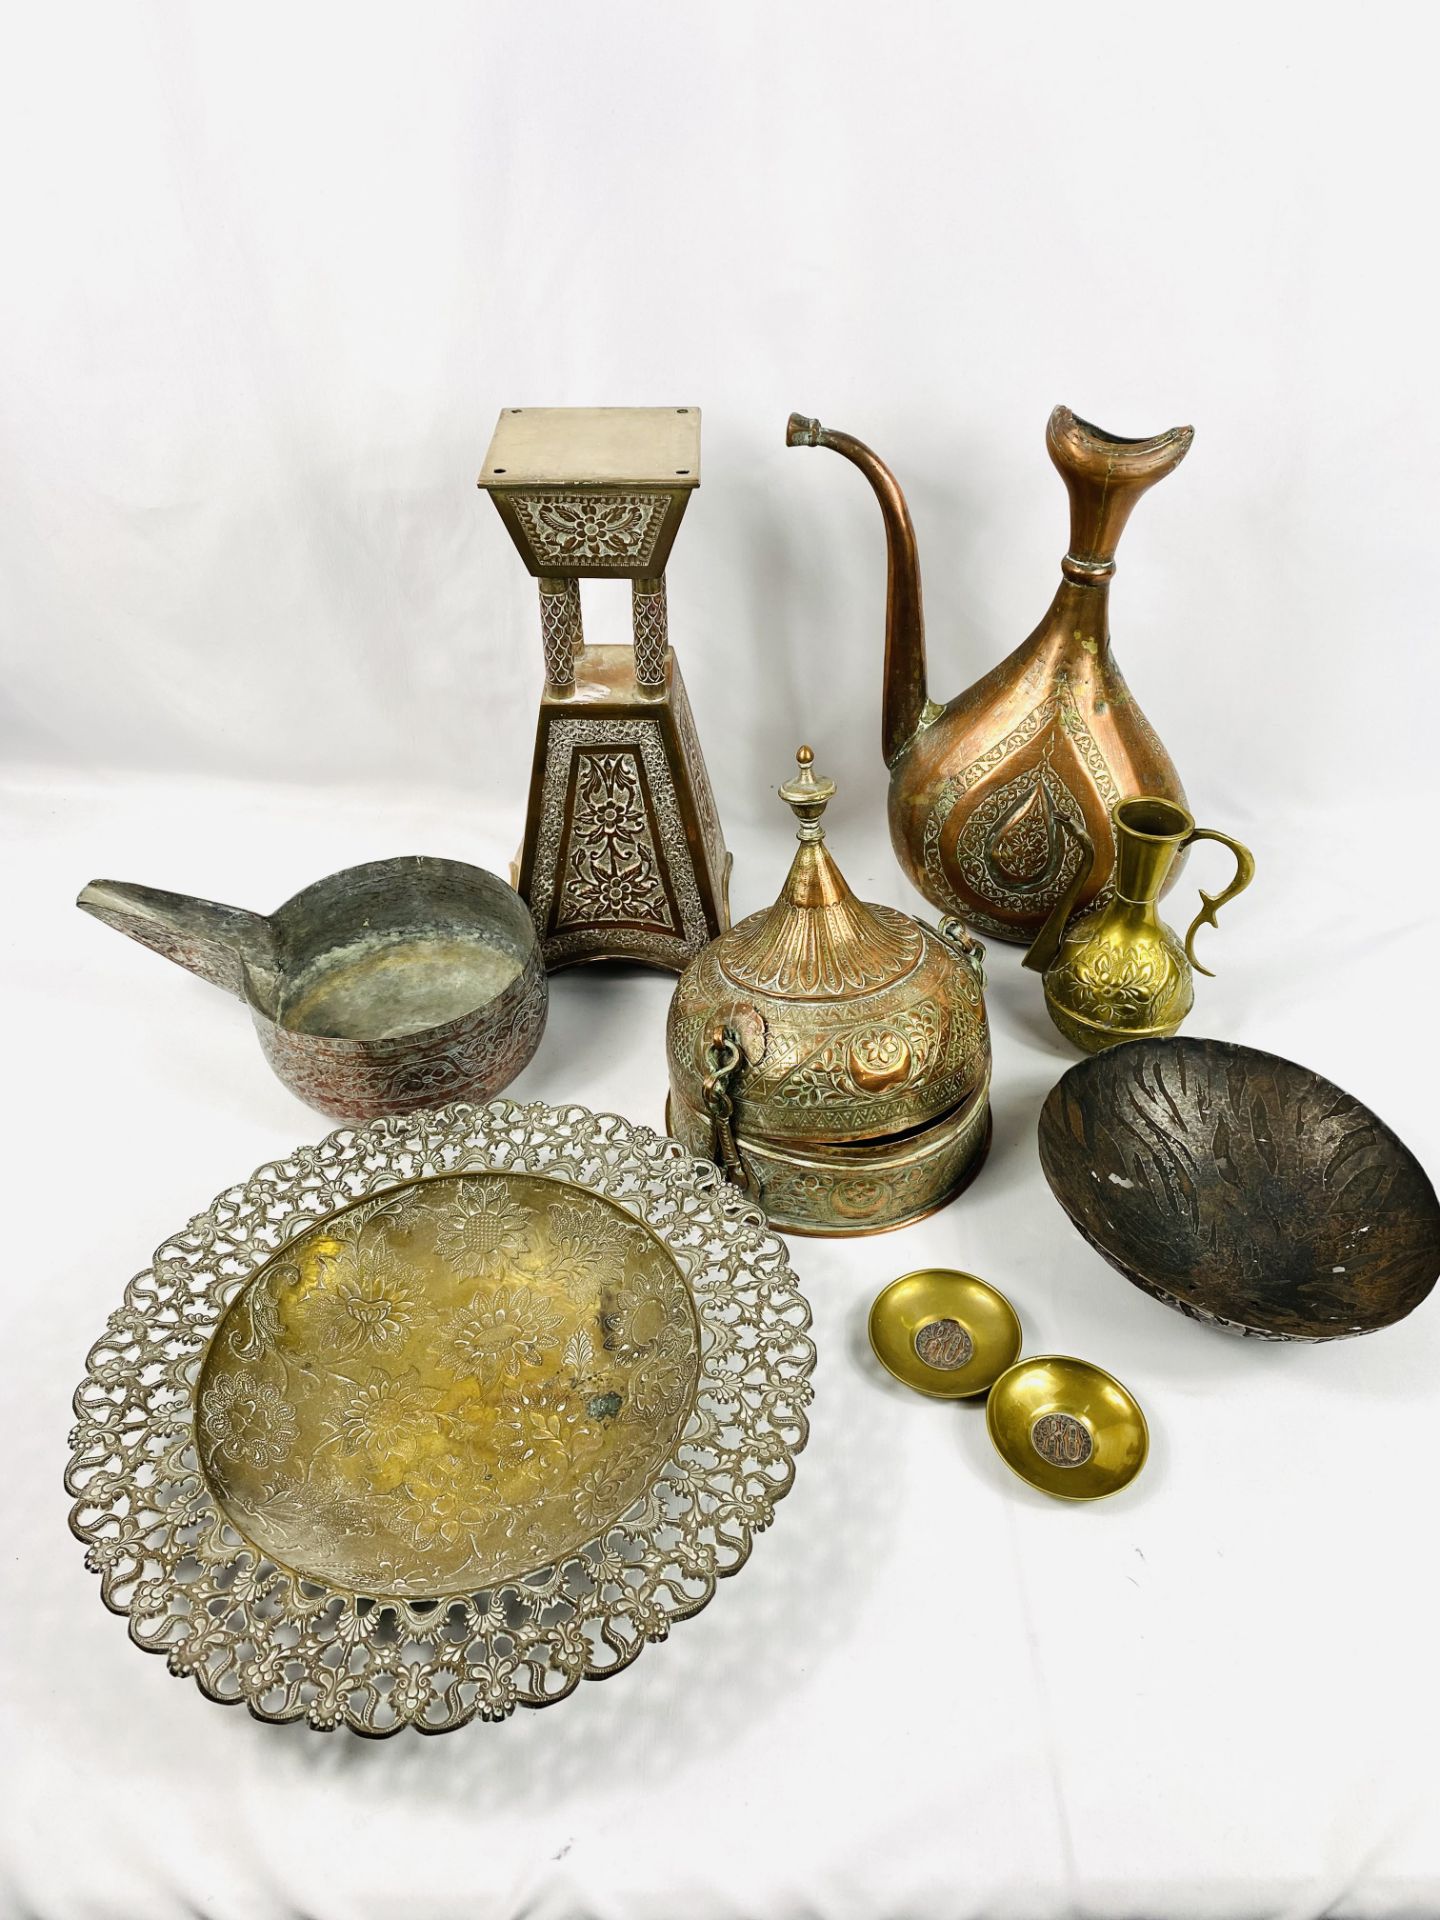 Quantity of Middle Eastern copper and brass